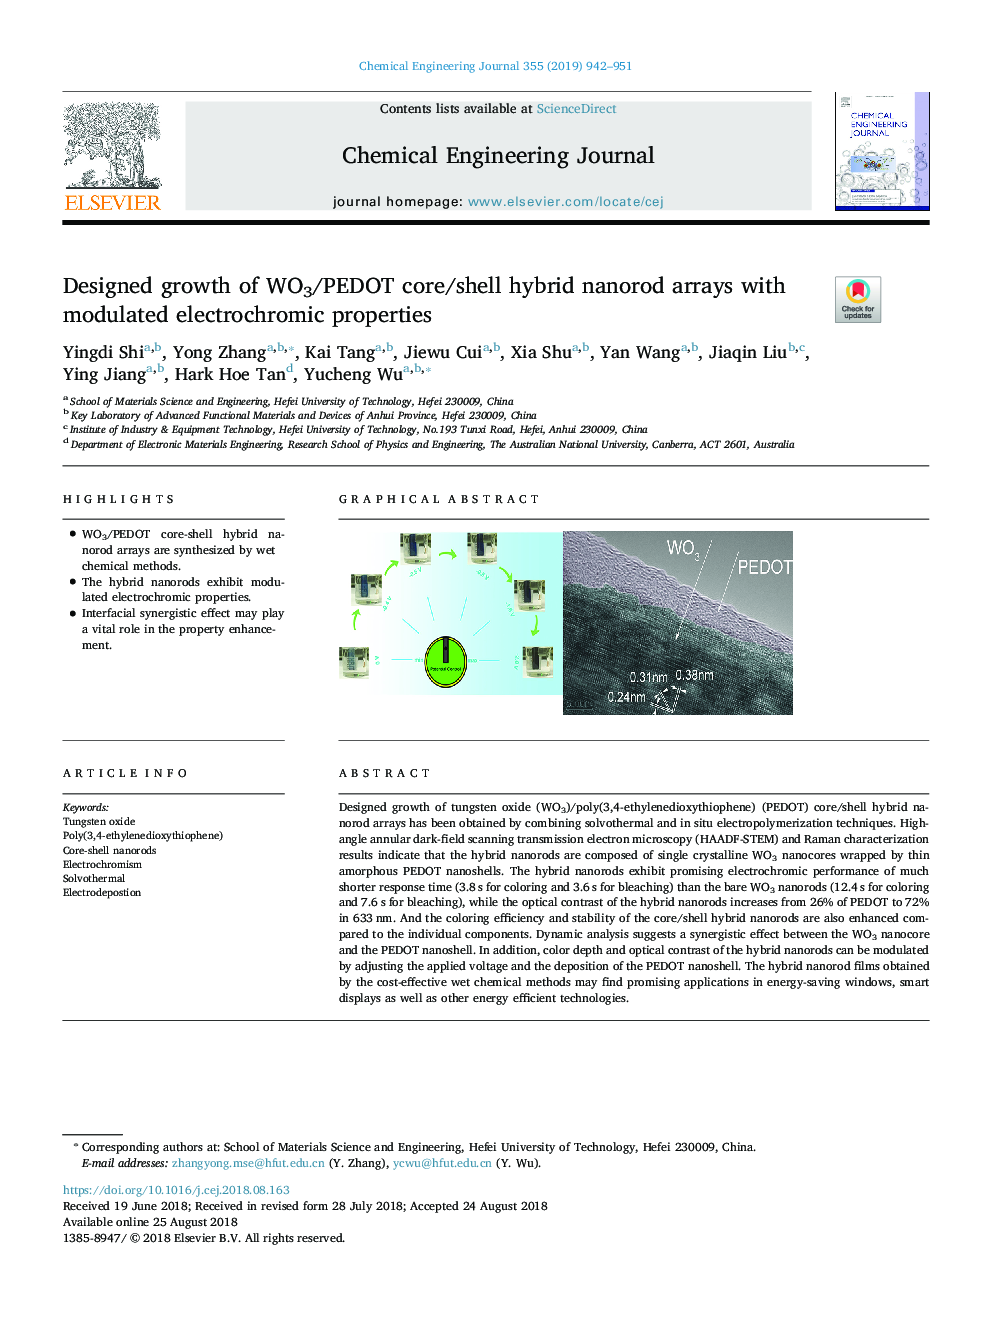 Designed growth of WO3/PEDOT core/shell hybrid nanorod arrays with modulated electrochromic properties